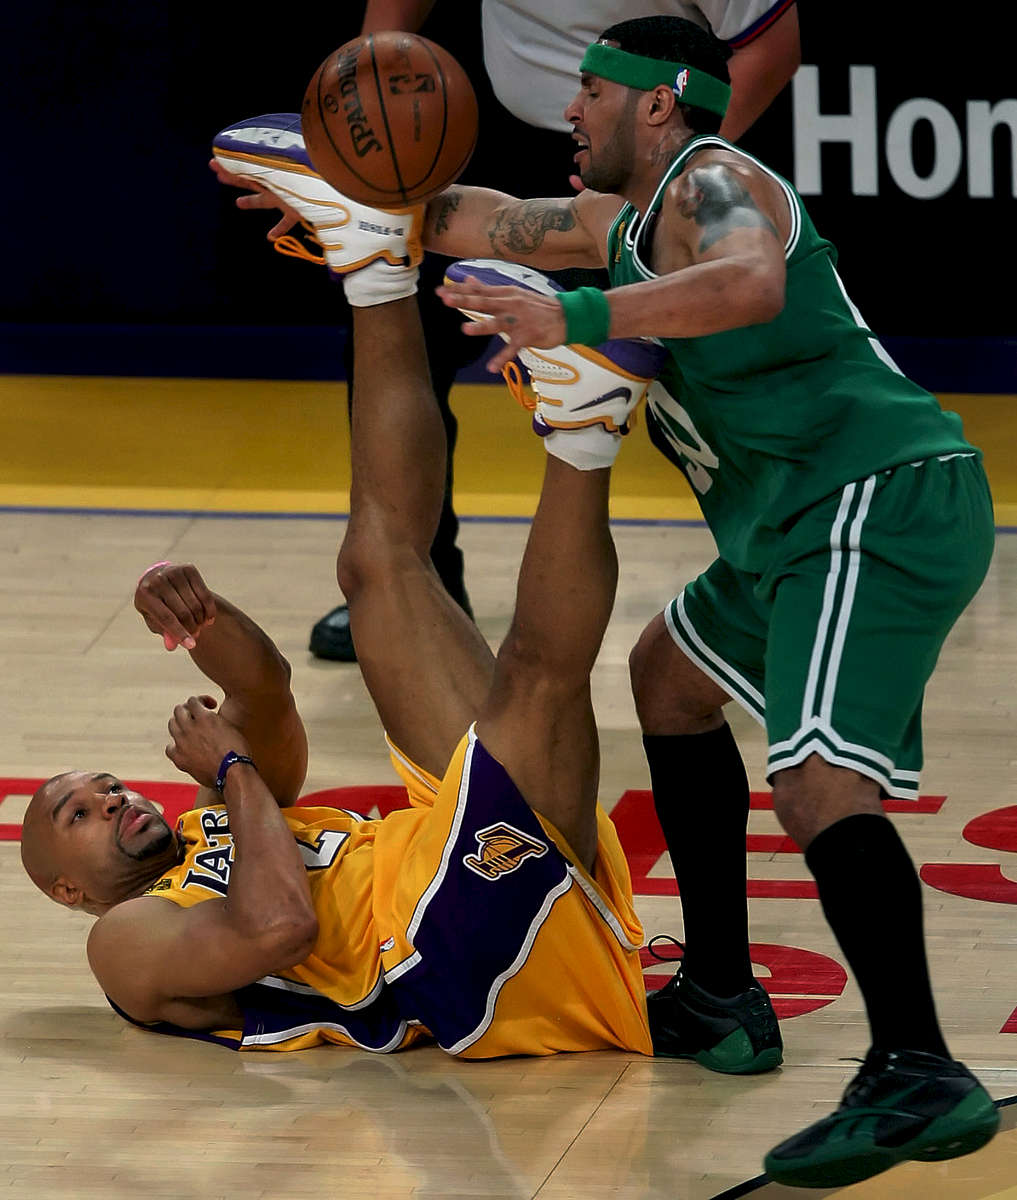 Los Angeles Lakers guard Derek Fisher and Boston Celtics guard Eddie House scramble for a loose ball in the second half during game 3 of the NBA basketball finals at the Staples Center in Los Angeles Calif. TheLakers won 87-81. (The Press-Enterprise/ Mark Zaleski)